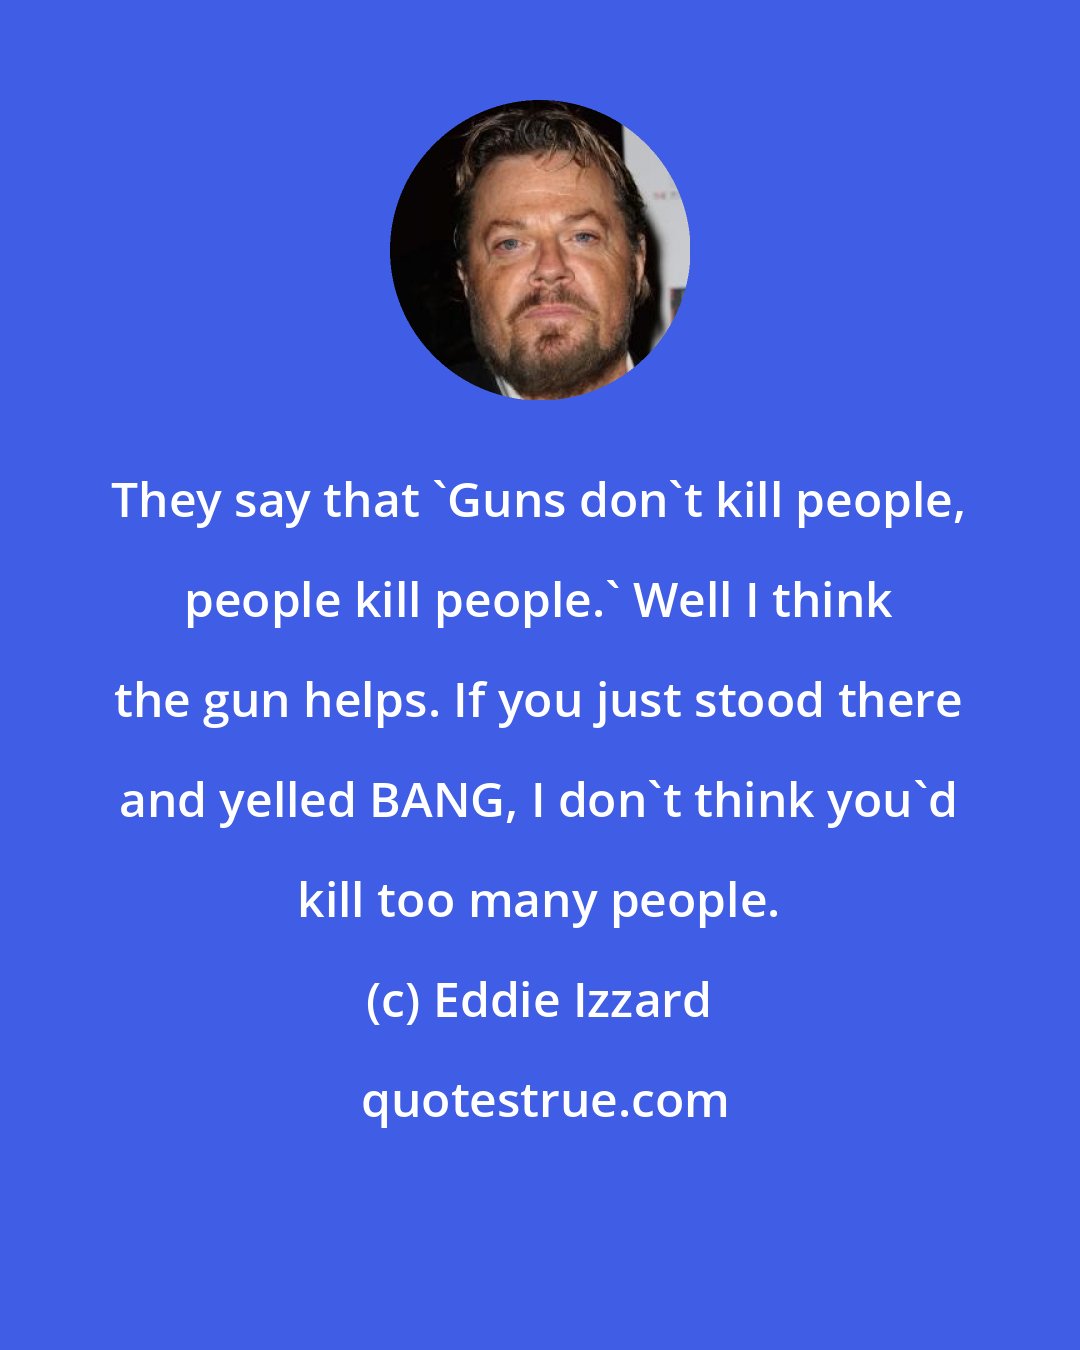 Eddie Izzard: They say that 'Guns don't kill people, people kill people.' Well I think the gun helps. If you just stood there and yelled BANG, I don't think you'd kill too many people.